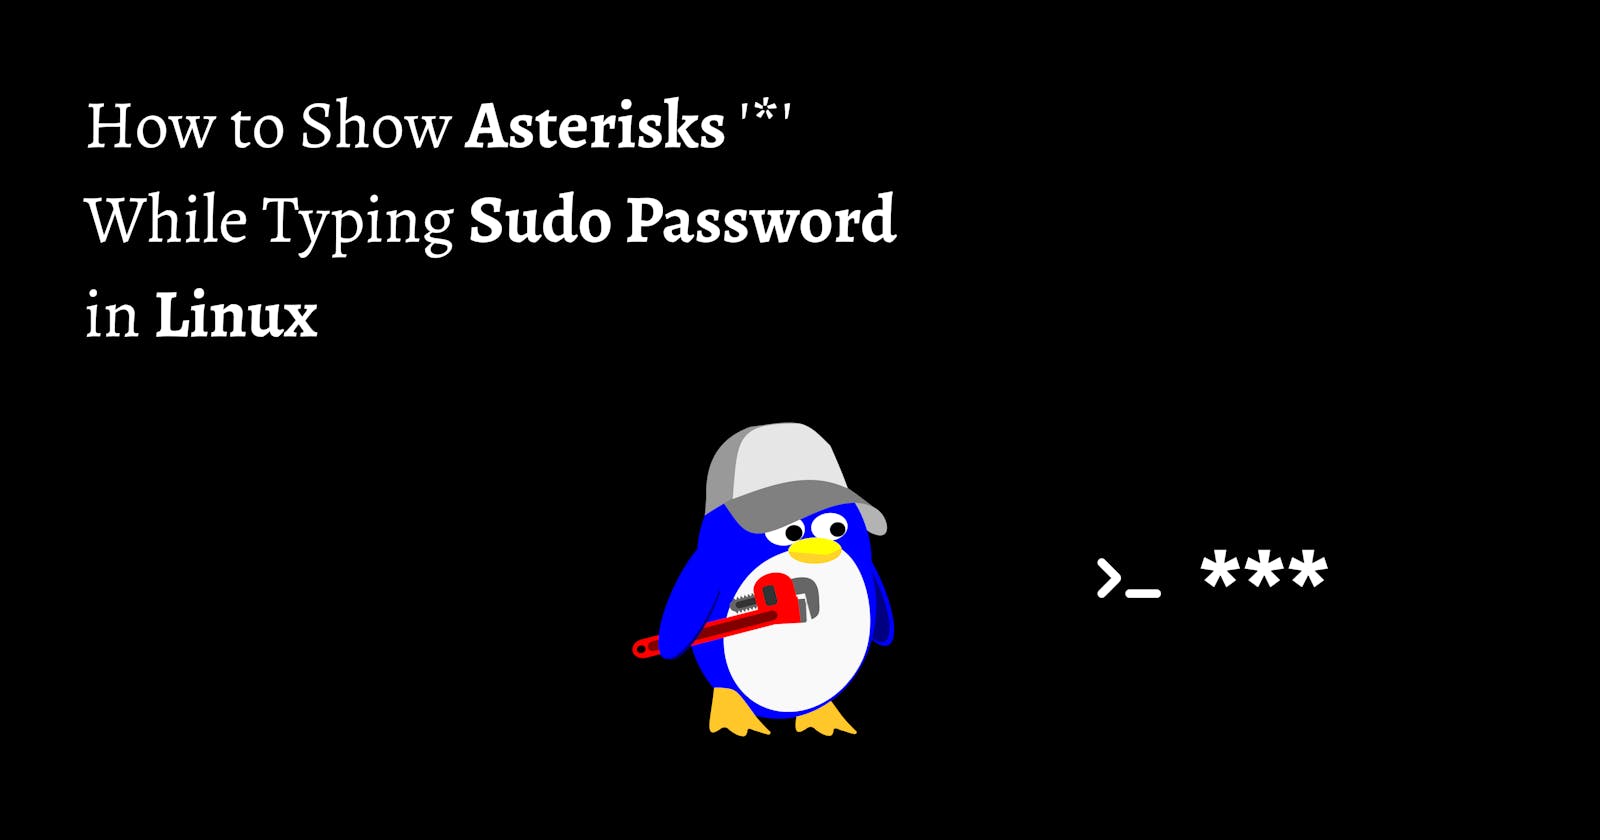 How to Show Asterisks While Typing Sudo Password in Linux